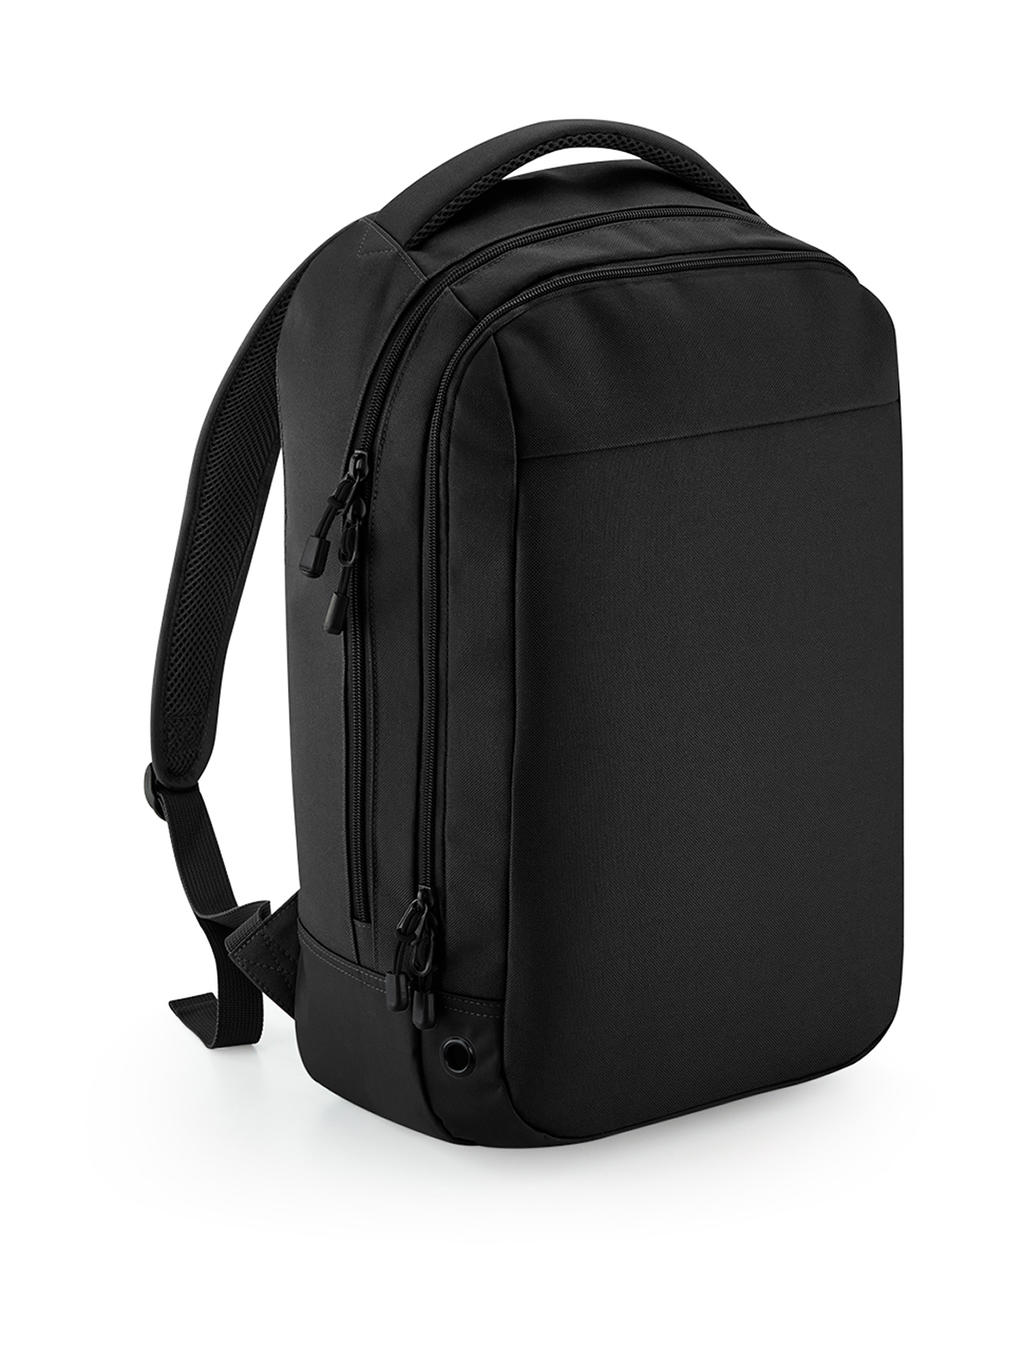  Athleisure Sports Backpack in Farbe Black/Black